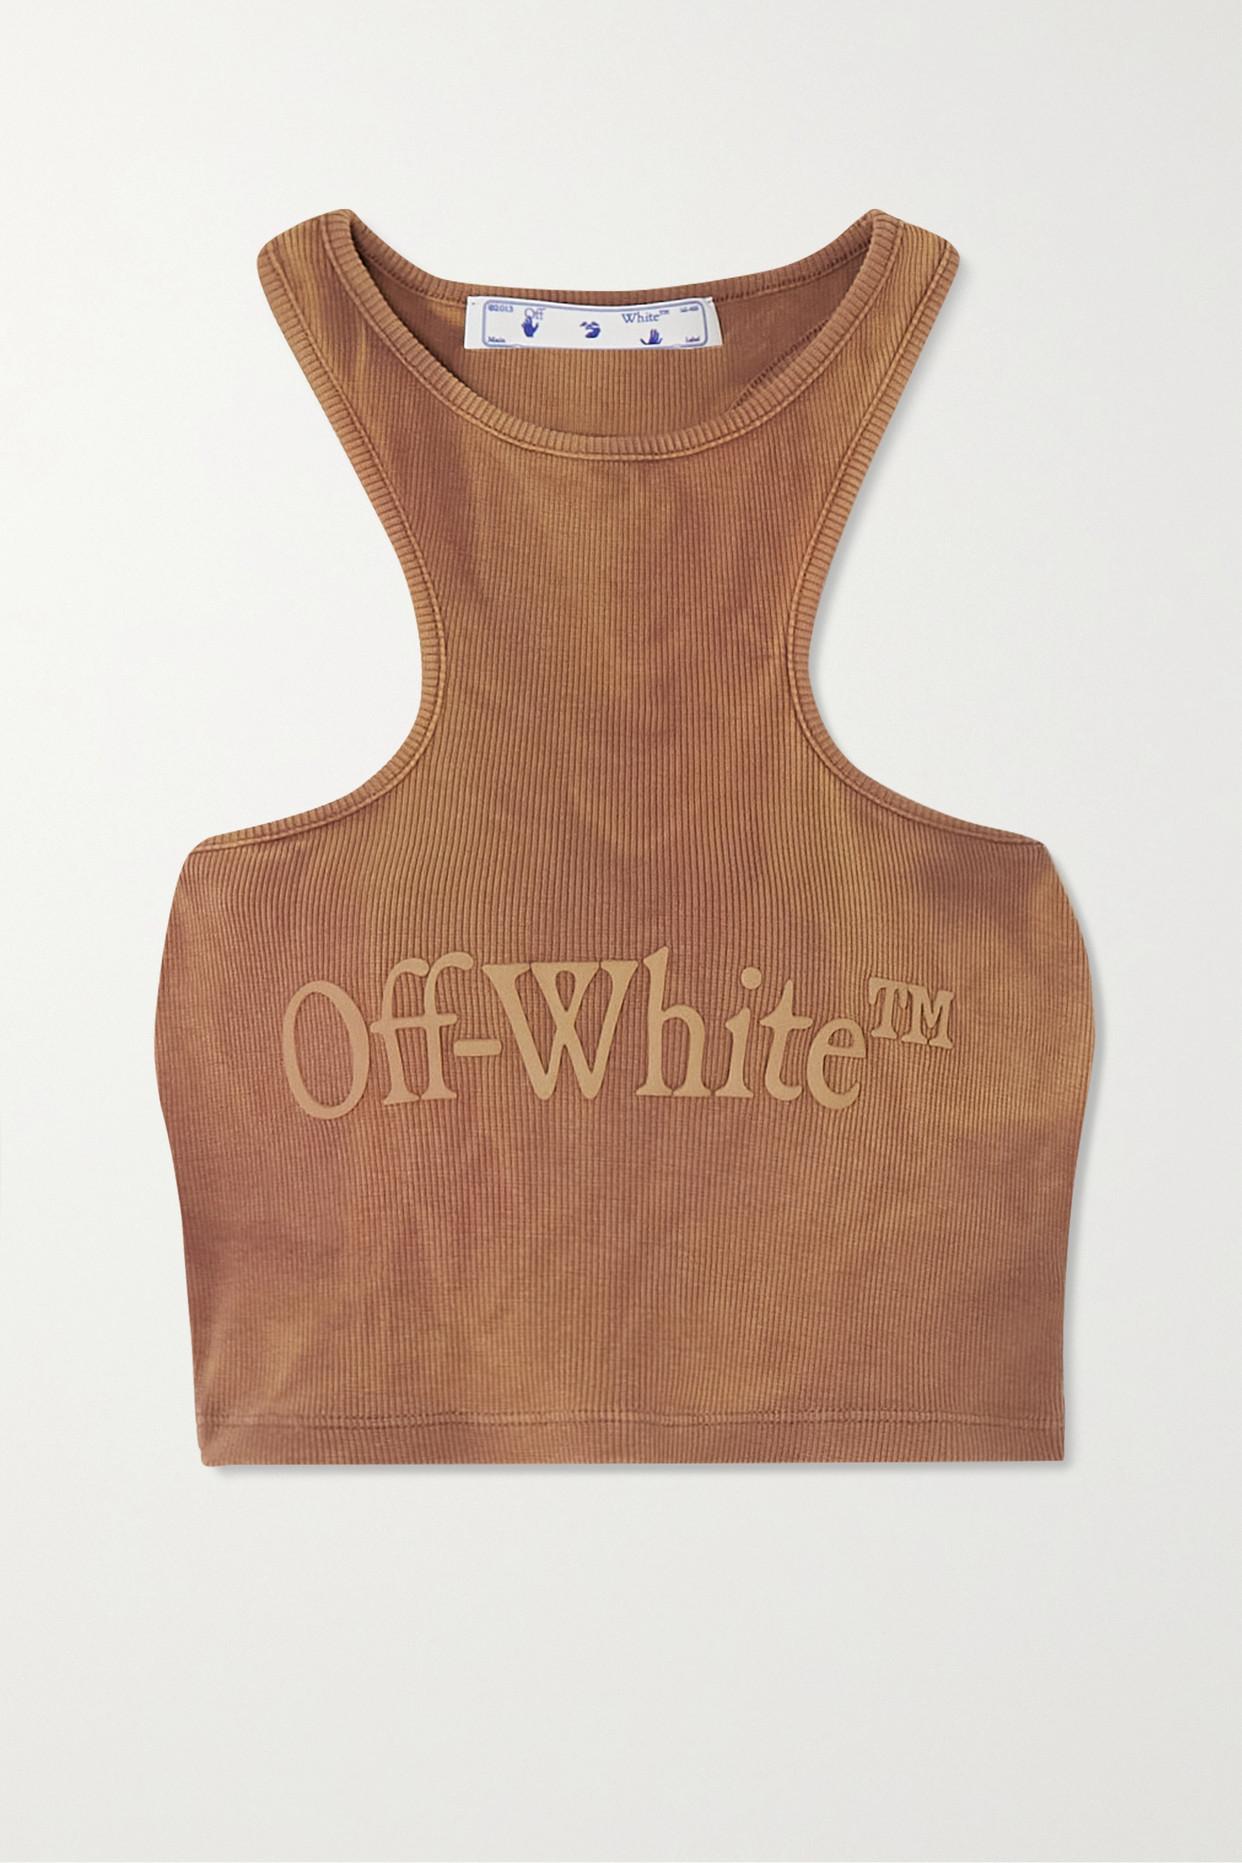 Cotton jersey tank top in off white